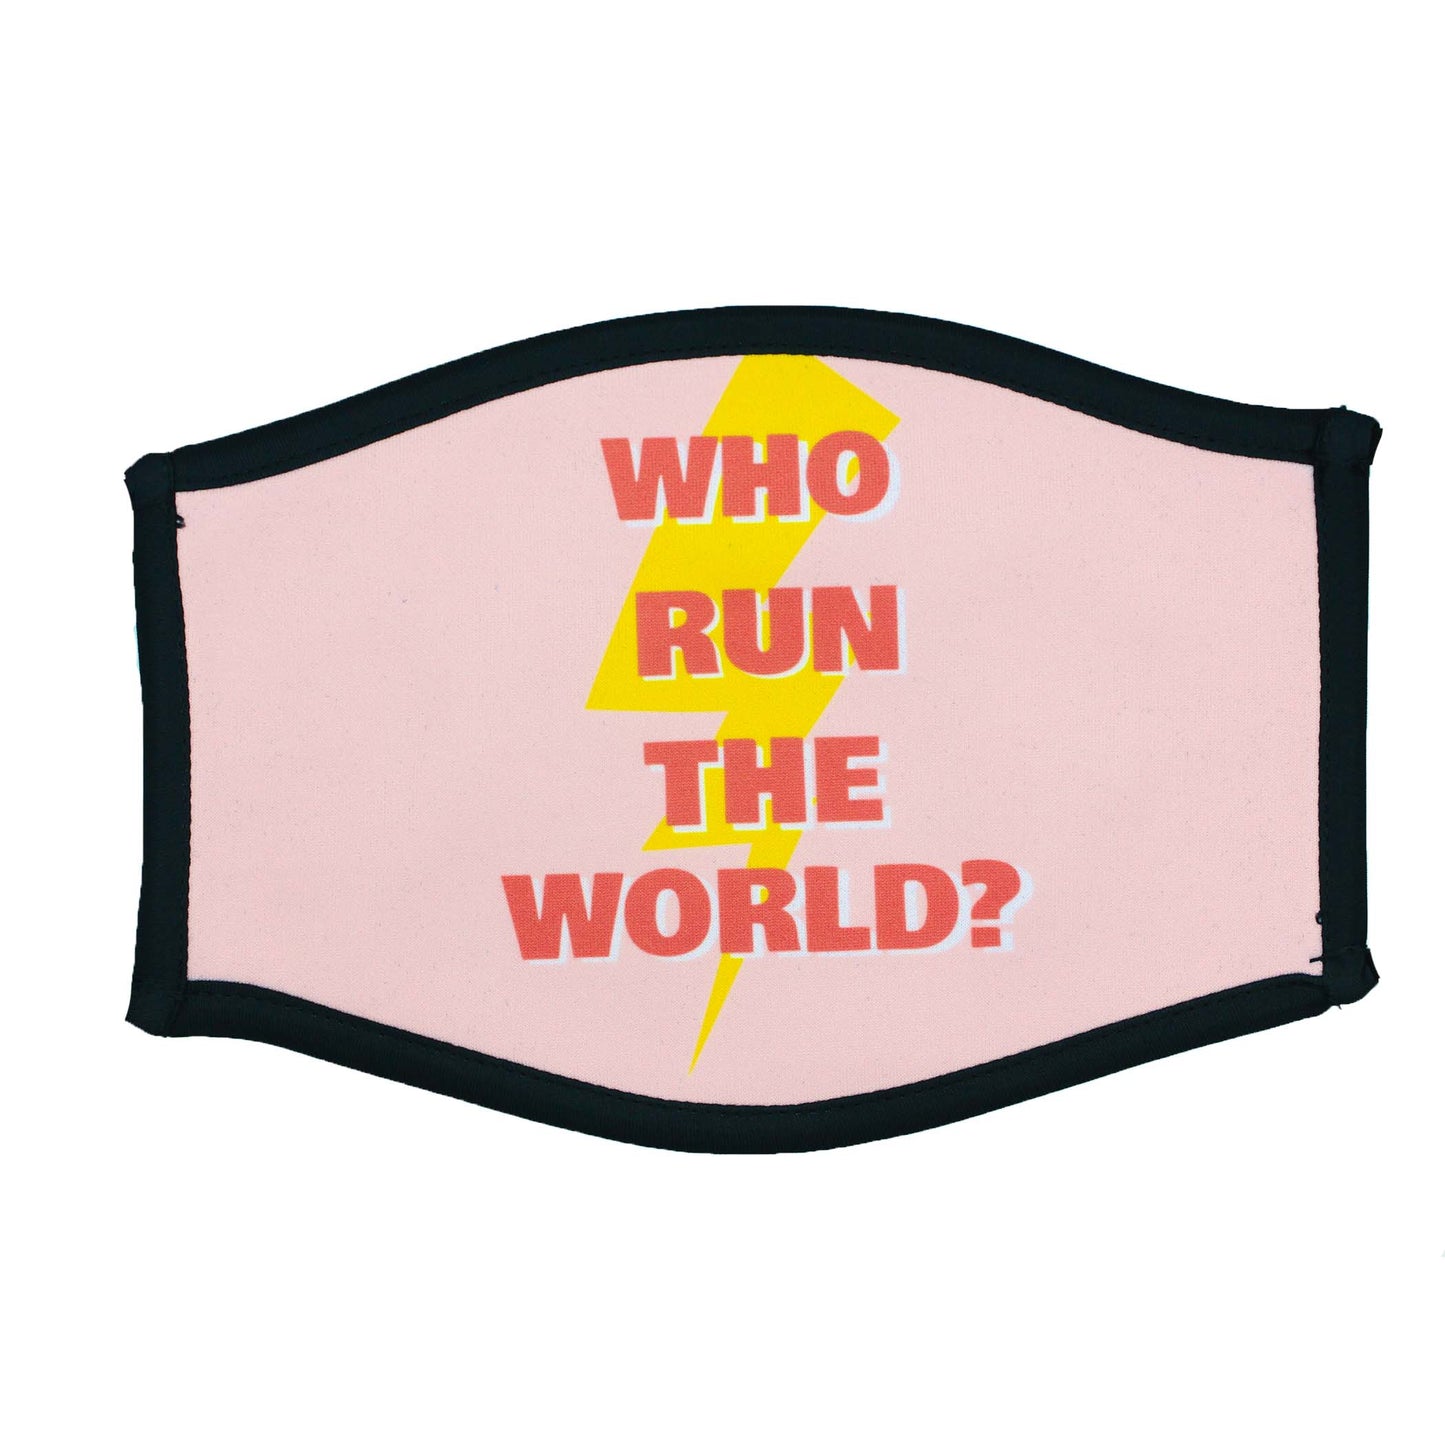 NEW--"WHO RUN THE WORLD?" FACE MASK